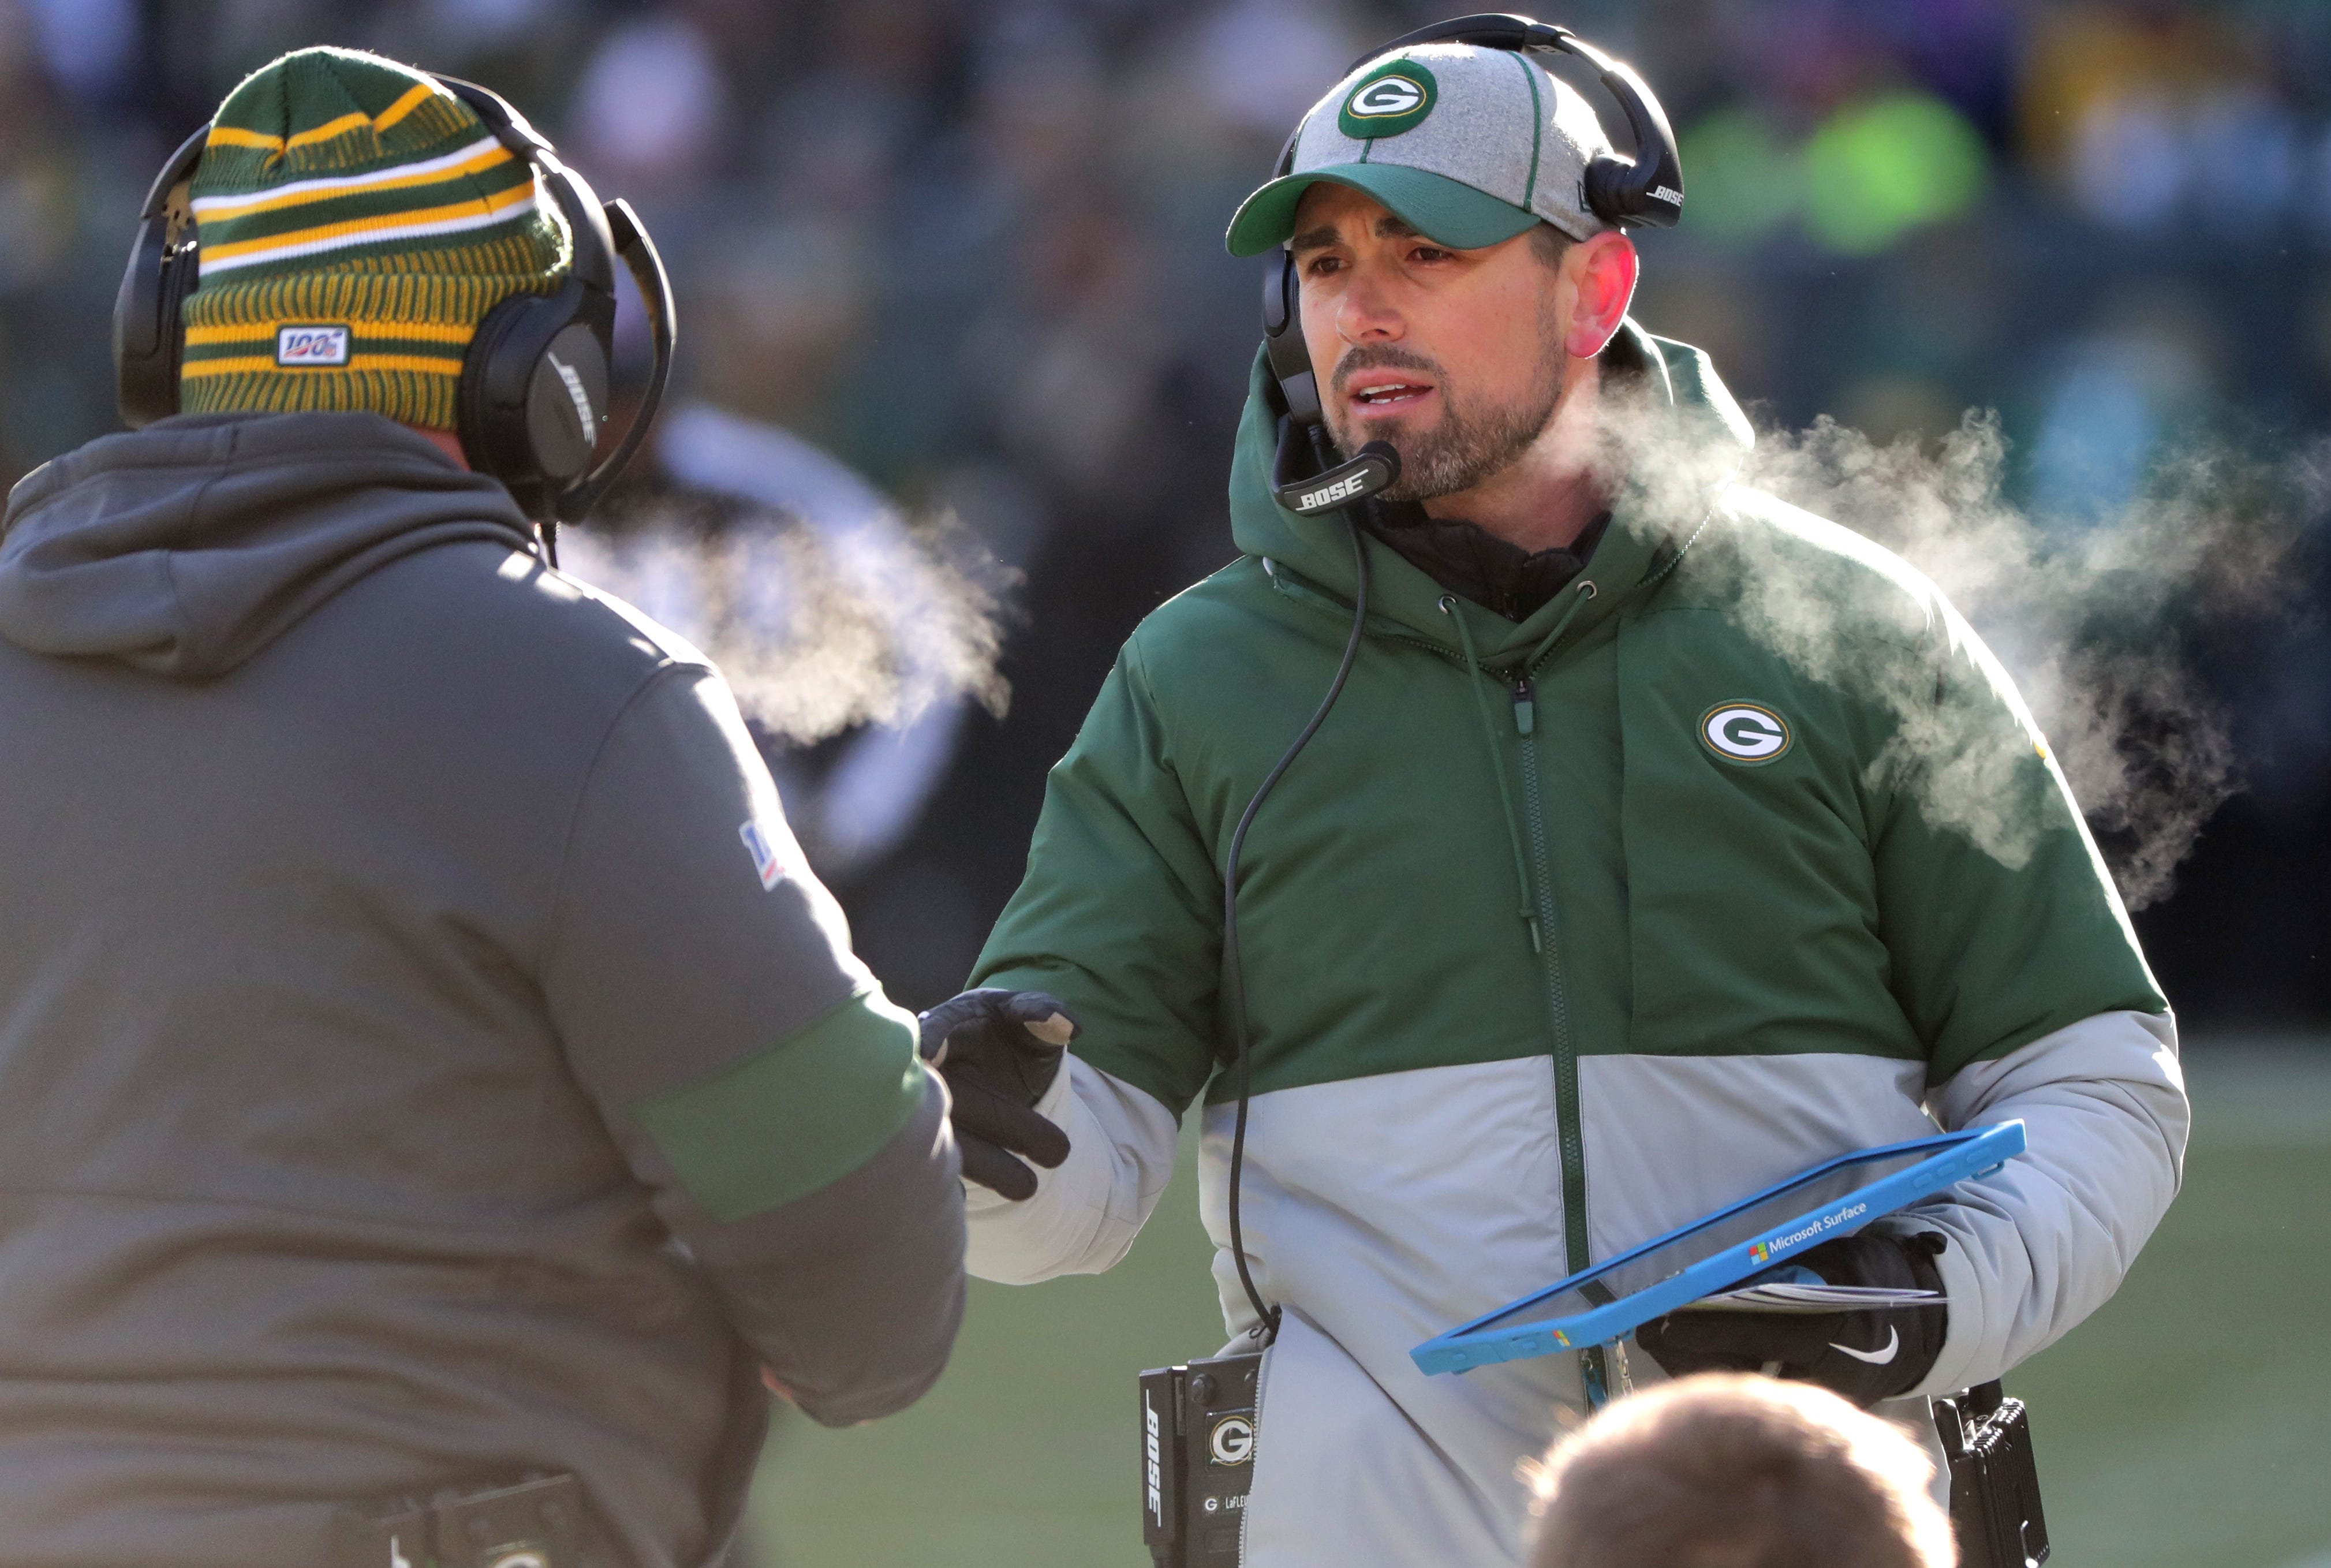 Green Bay Packers head coach Matt LaFleur is shown during the first  quarter of their game Sunday, December 15, 2019 at Lambeau Field in Green Bay, Wis. The Green Bay Packers beat the Chicago Bears 21-13.